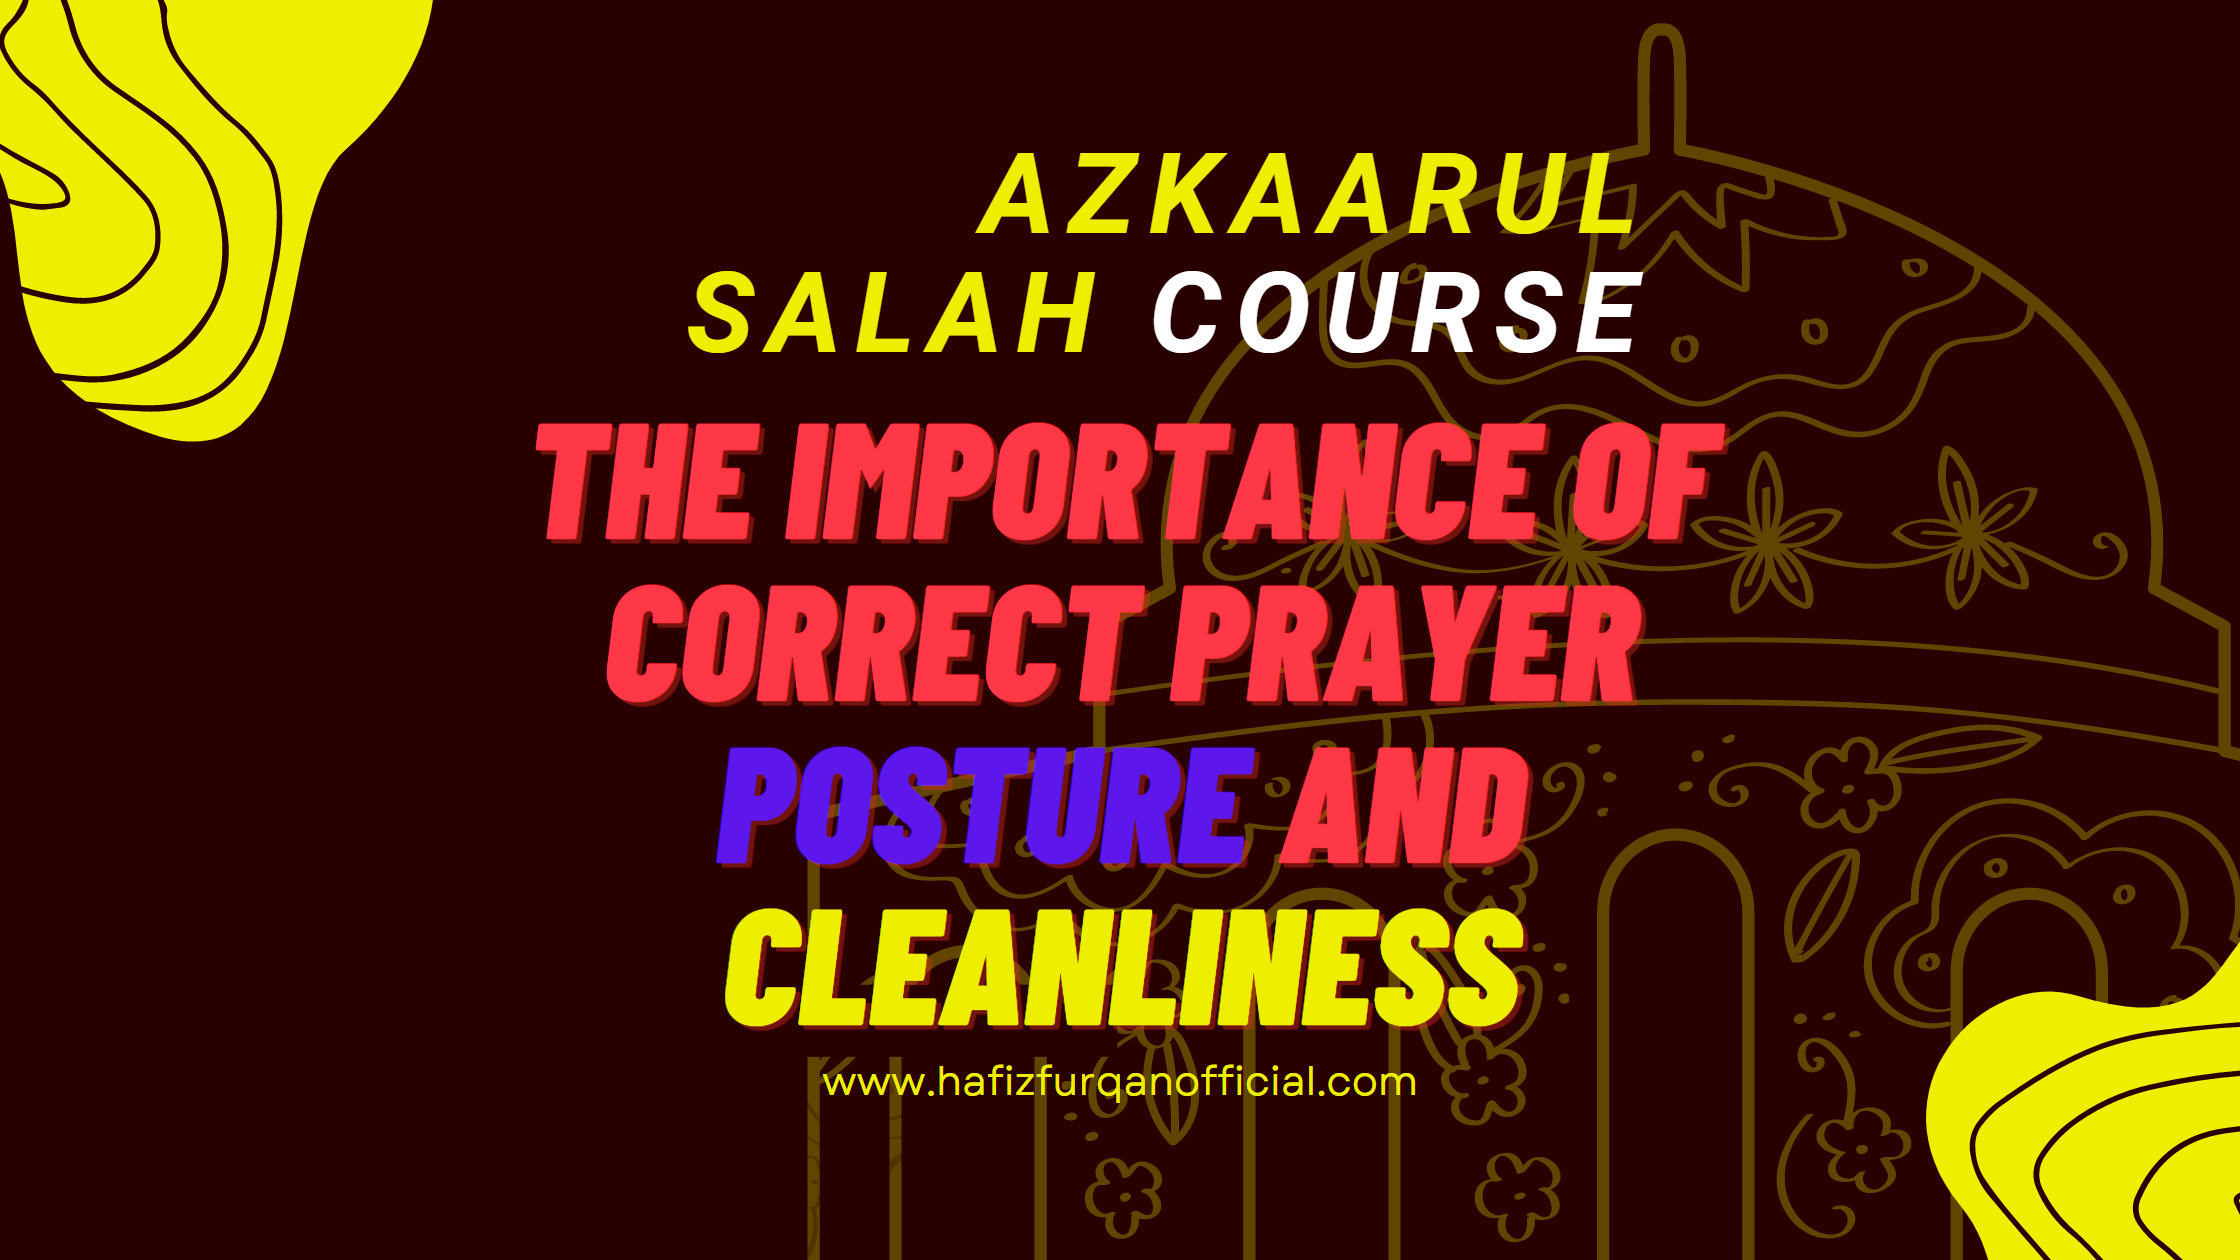 The importance of correct prayer posture and cleanliness